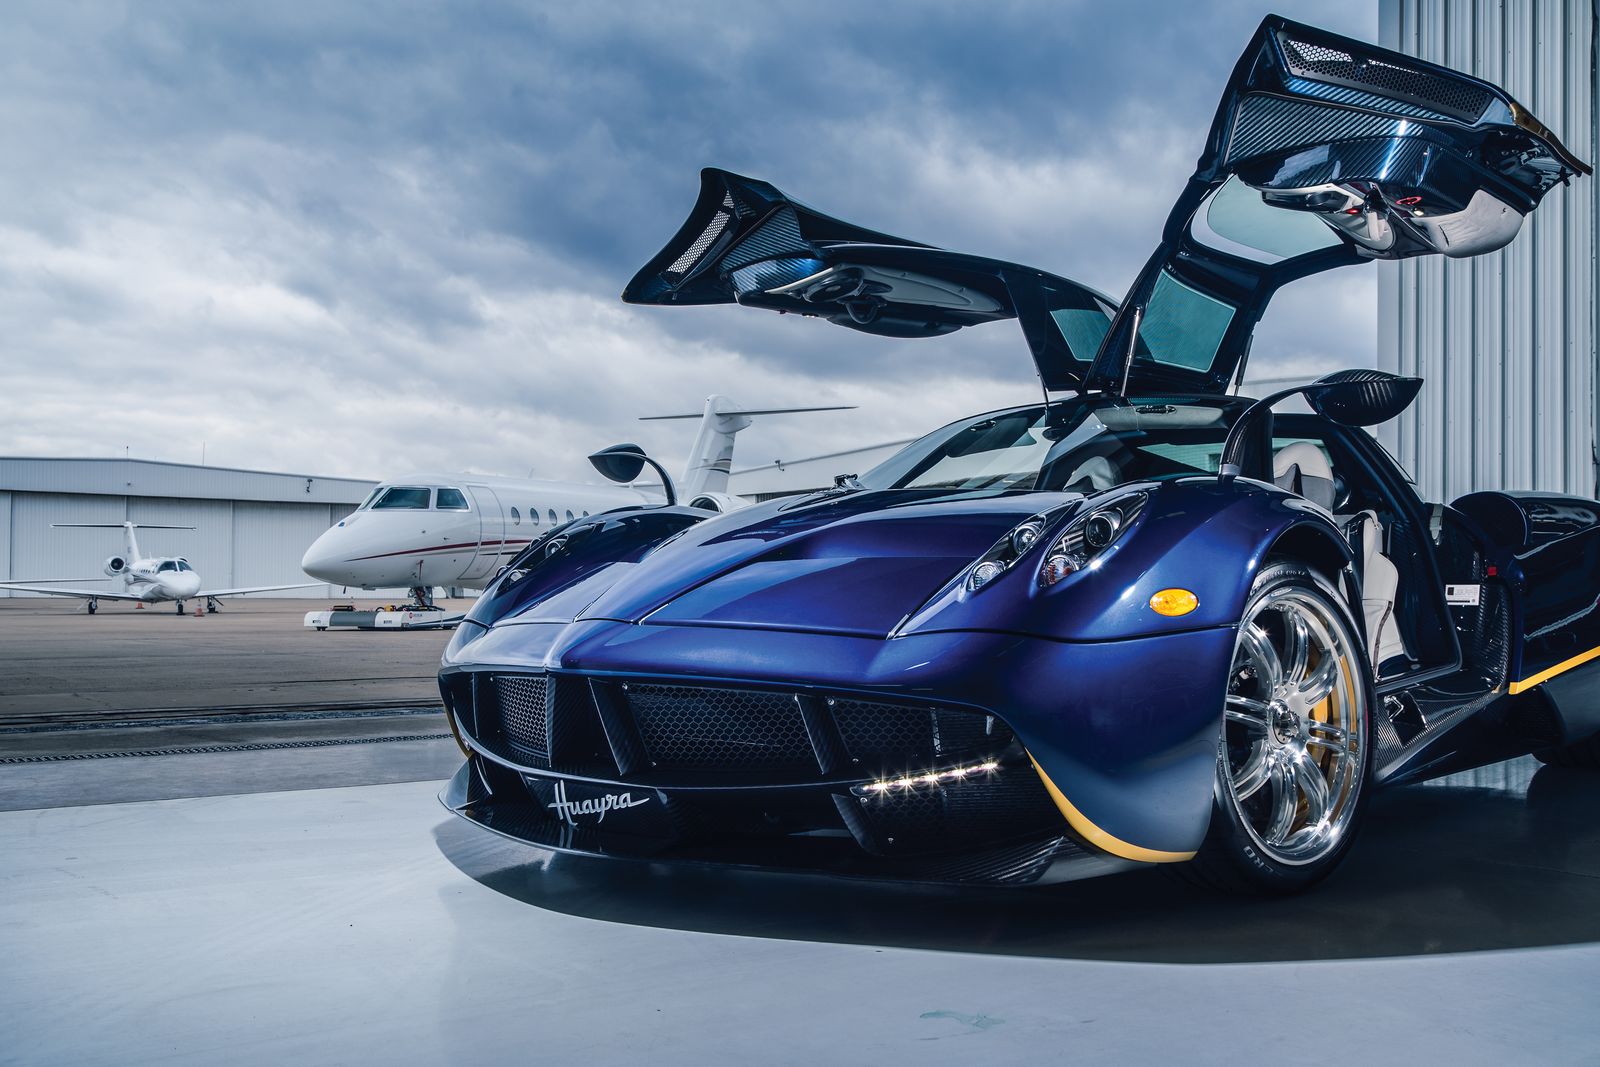 Rare Blue Pagani Huayra Has Over $260,000 Worth Of Extras! | Carscoops